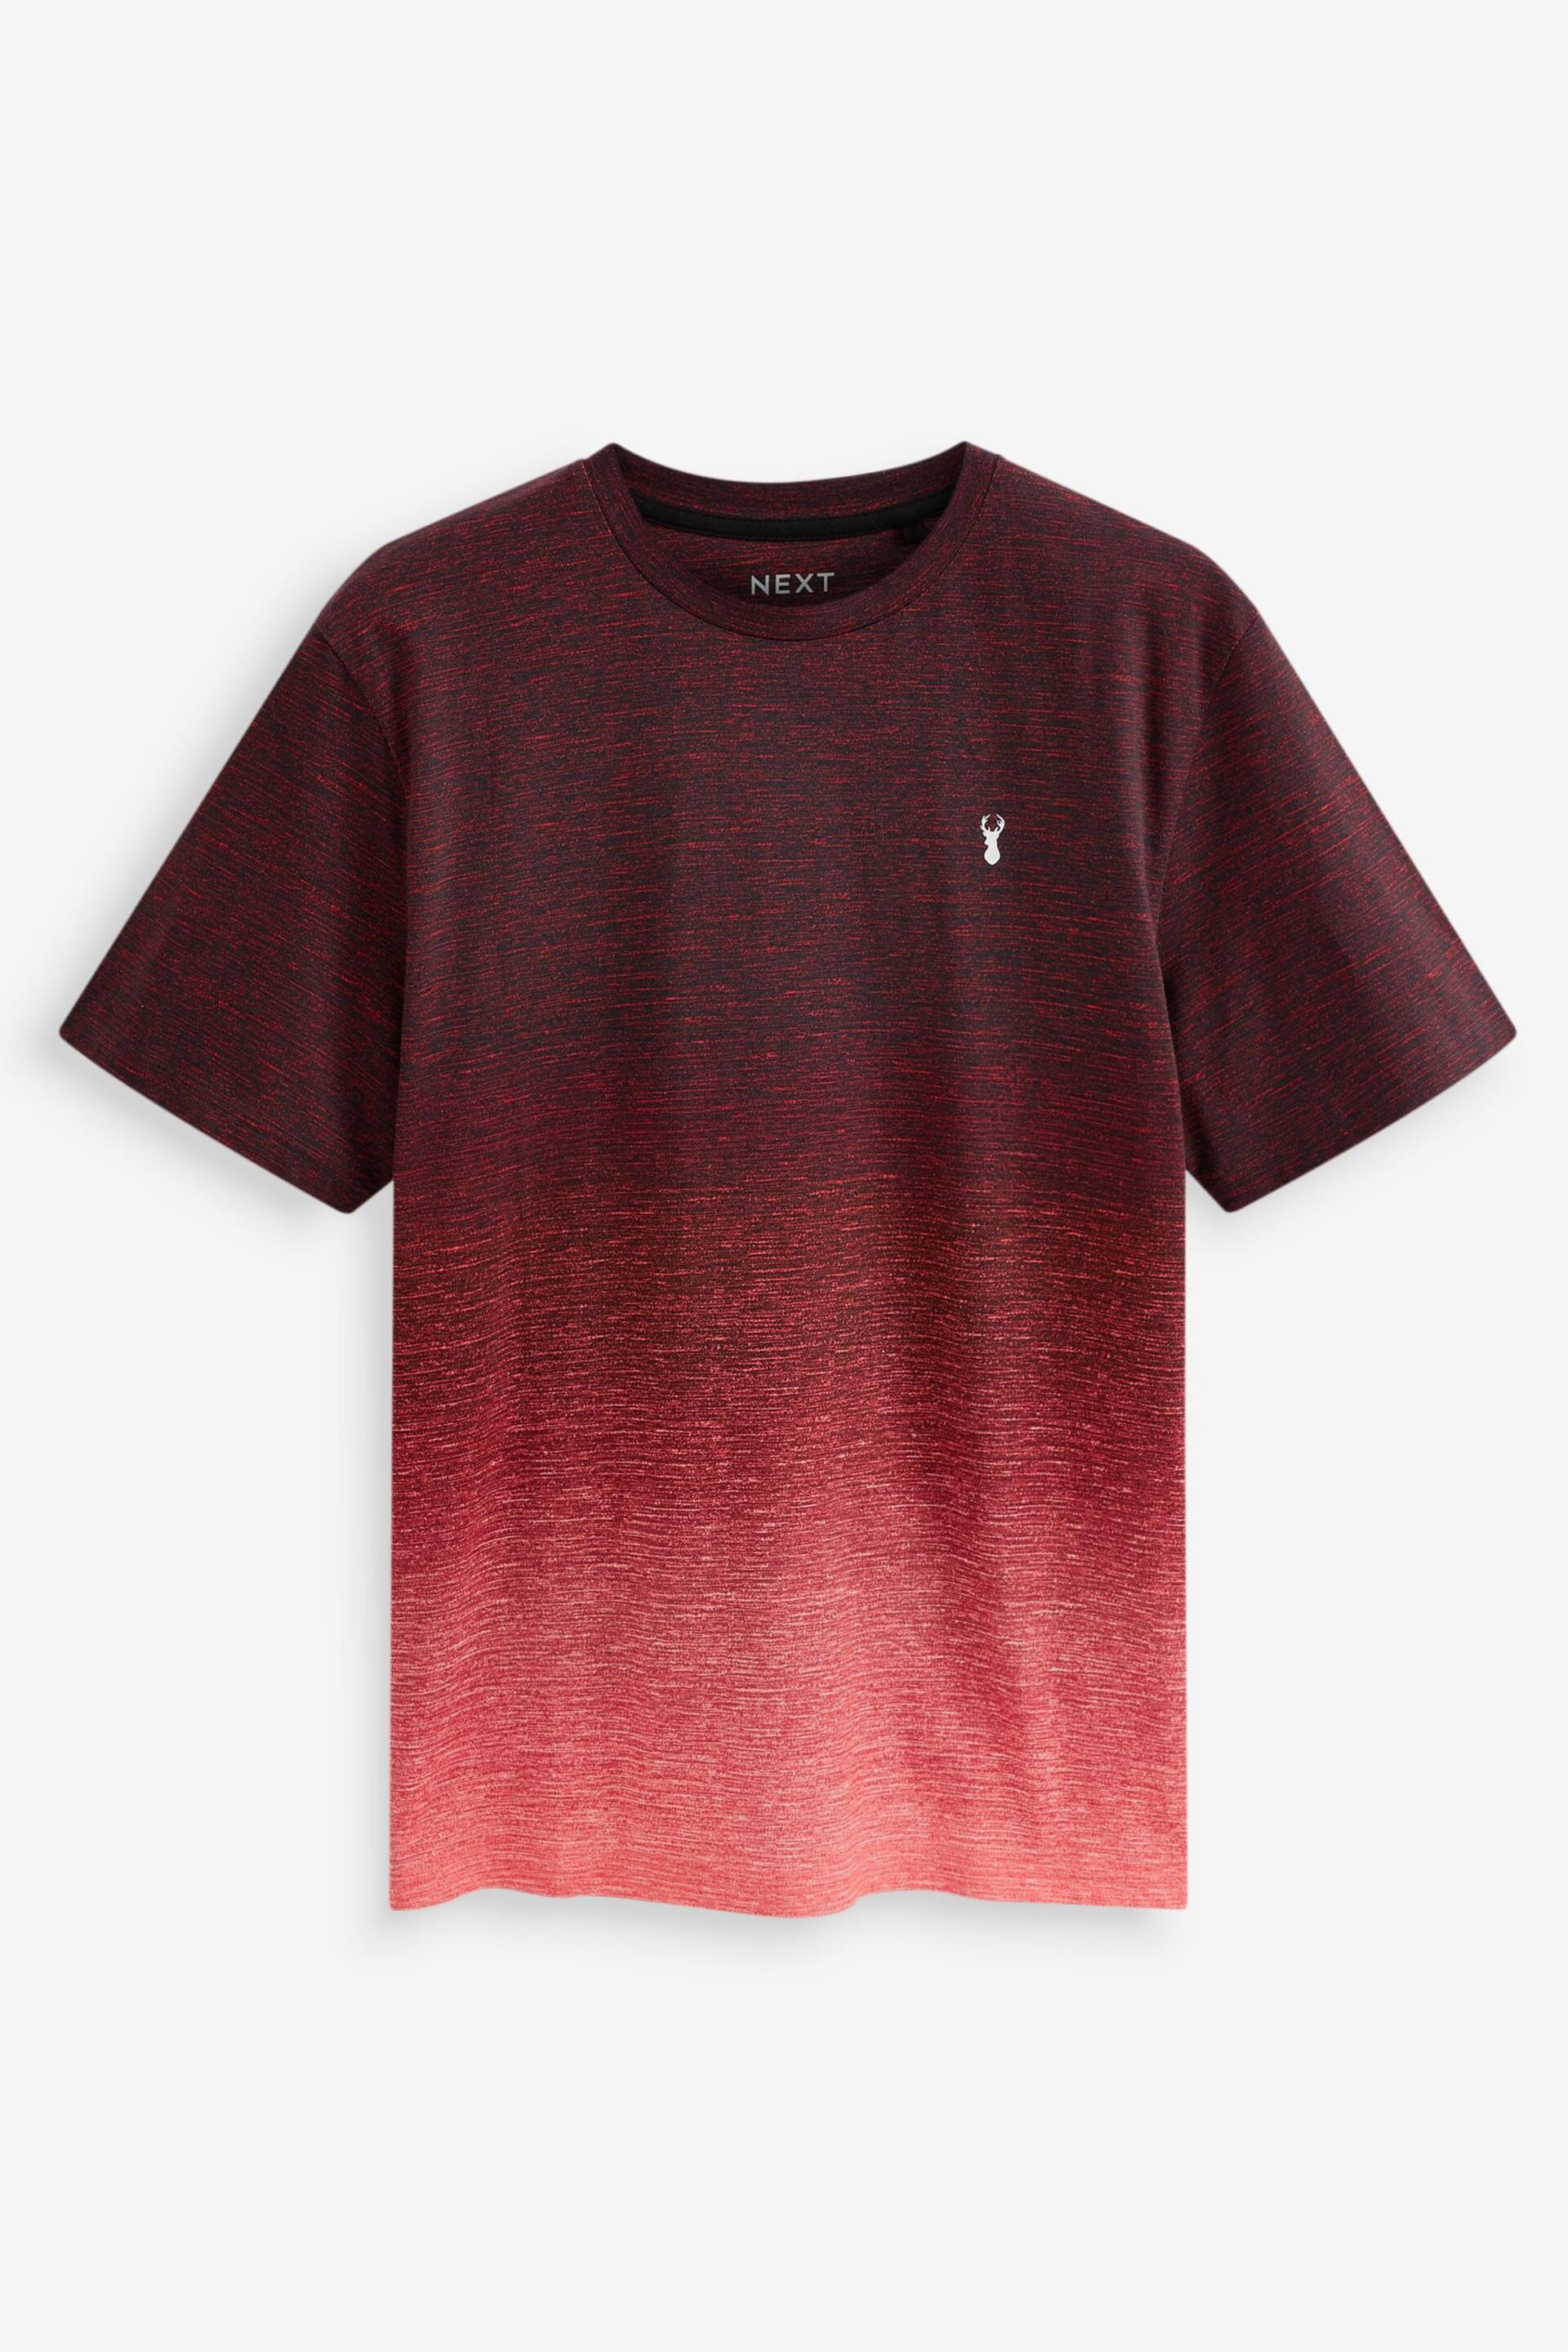 Coral Red Stag Dip Dye T-Shirt - Image 5 of 5